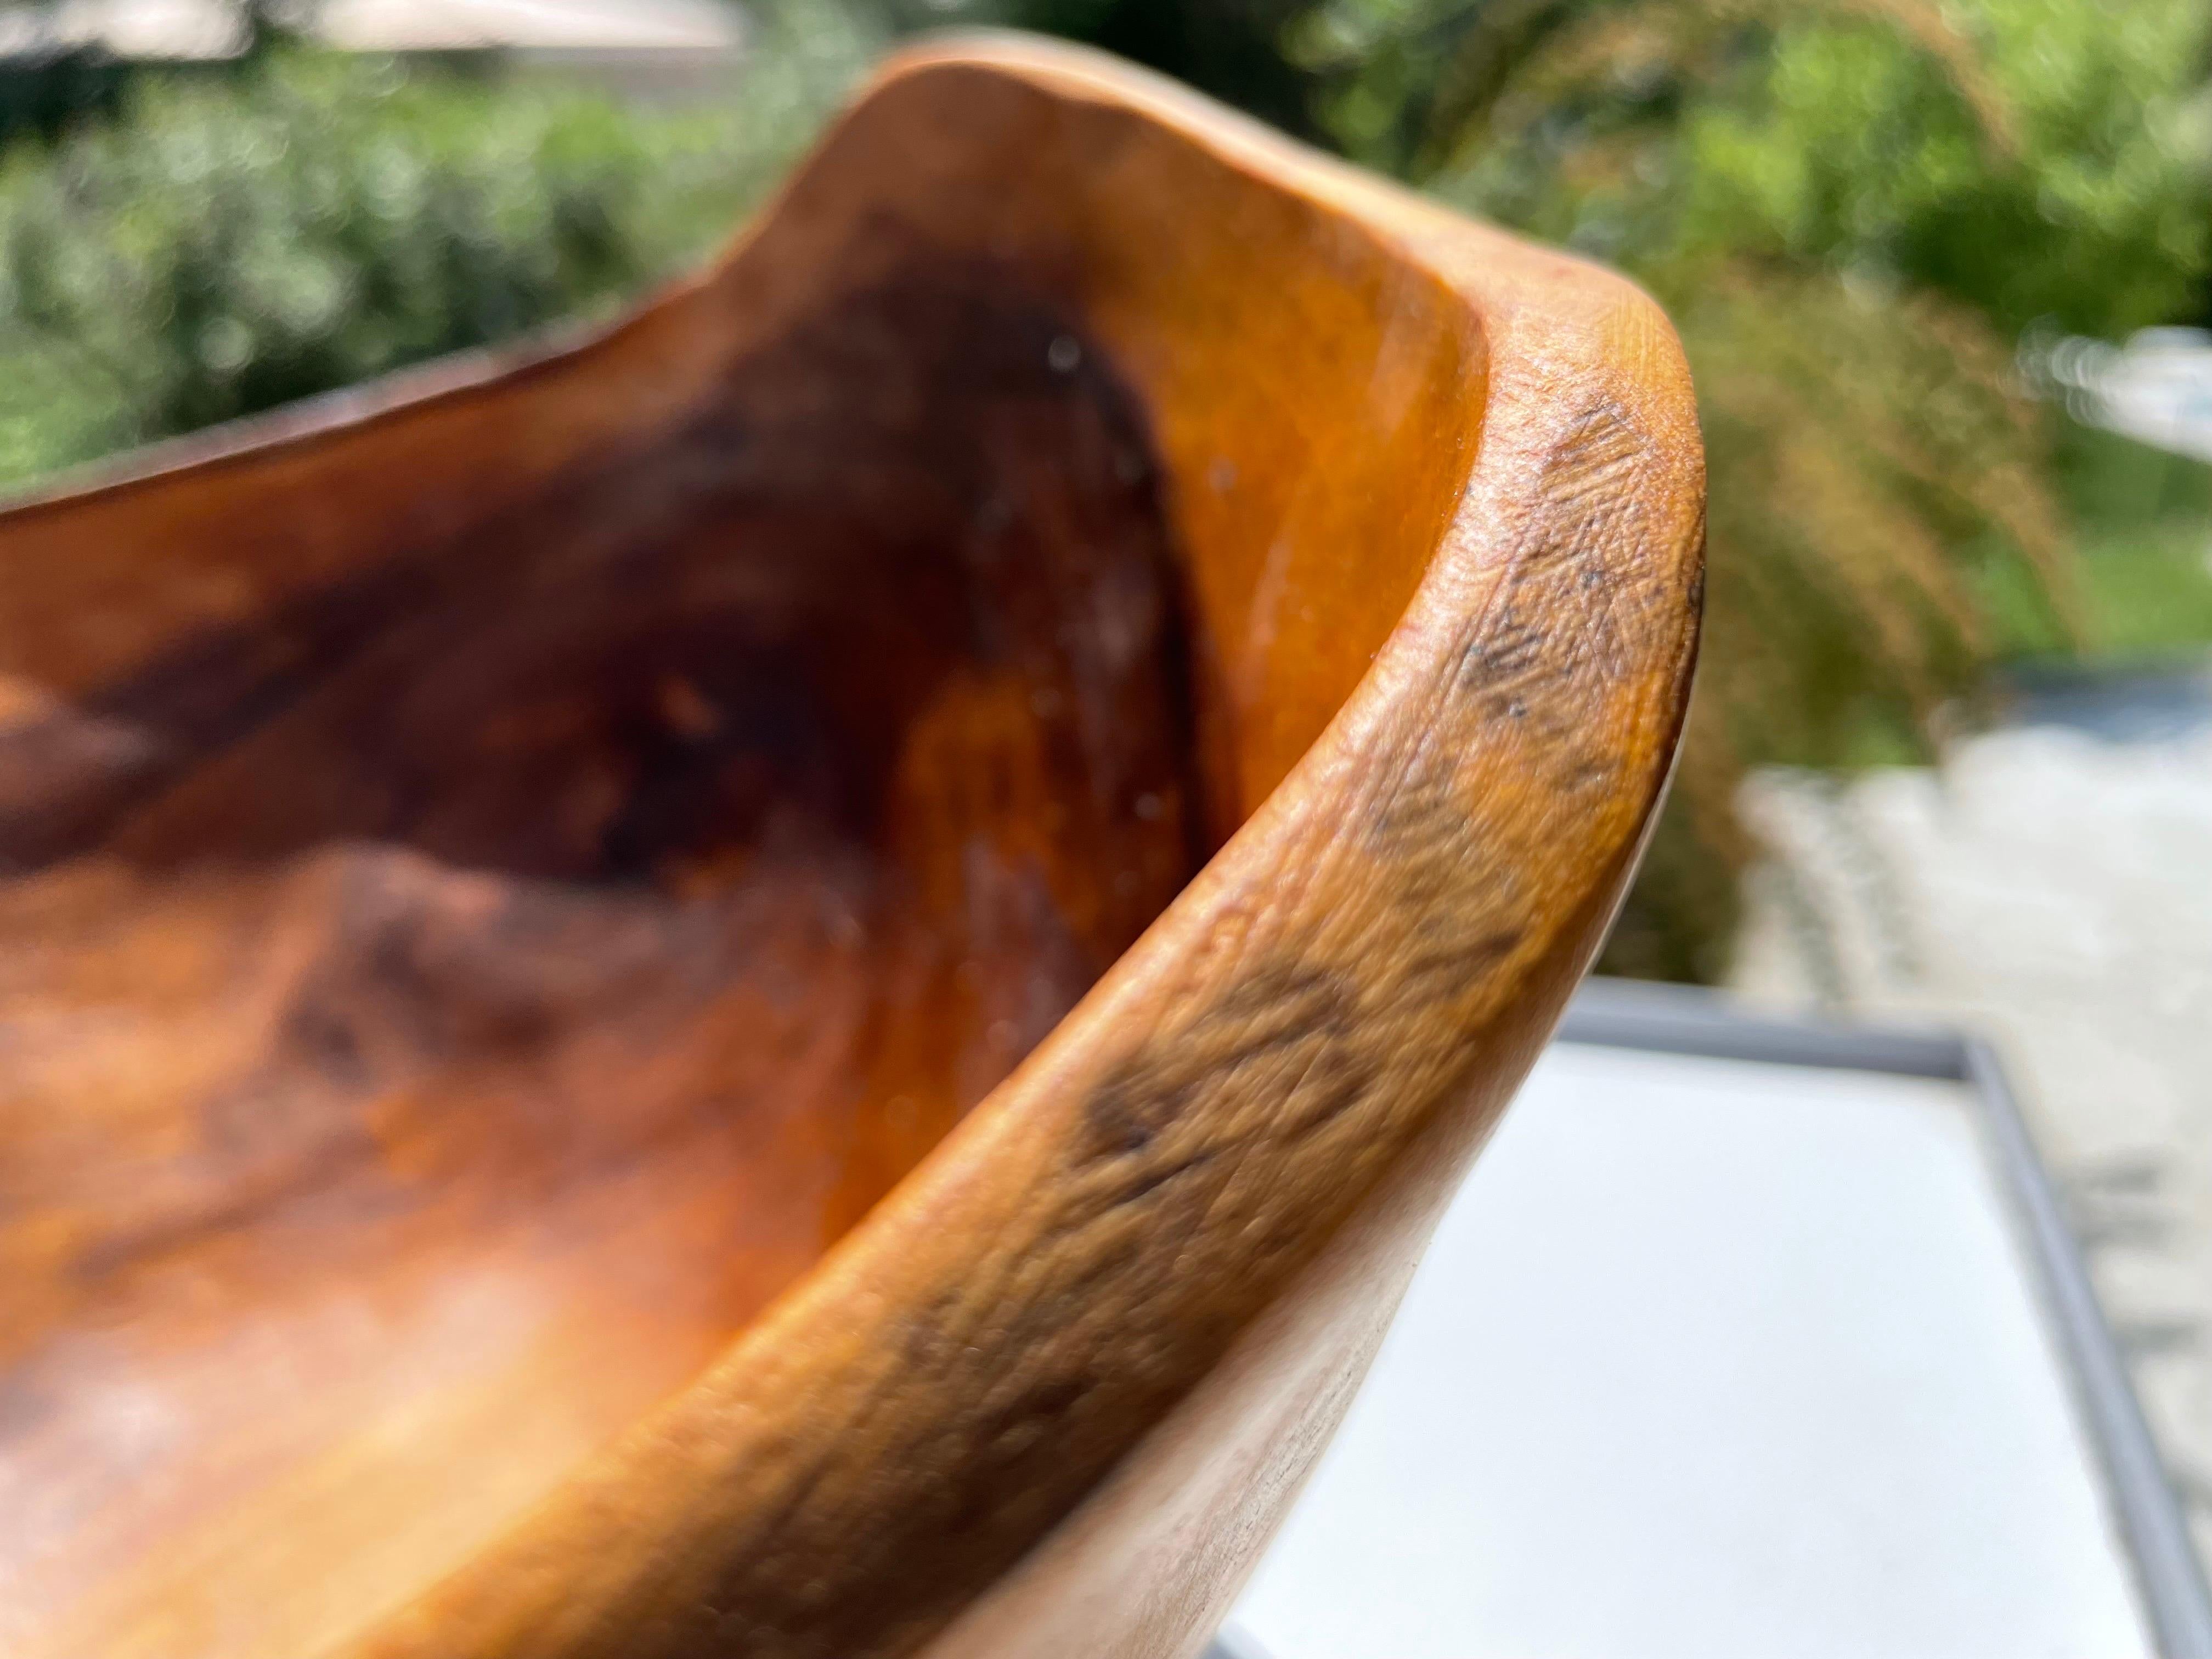 This bowl is a decorative bowl, made in France circa 1960. It is the French Riviera Style. The Olive wood is in a brown color.